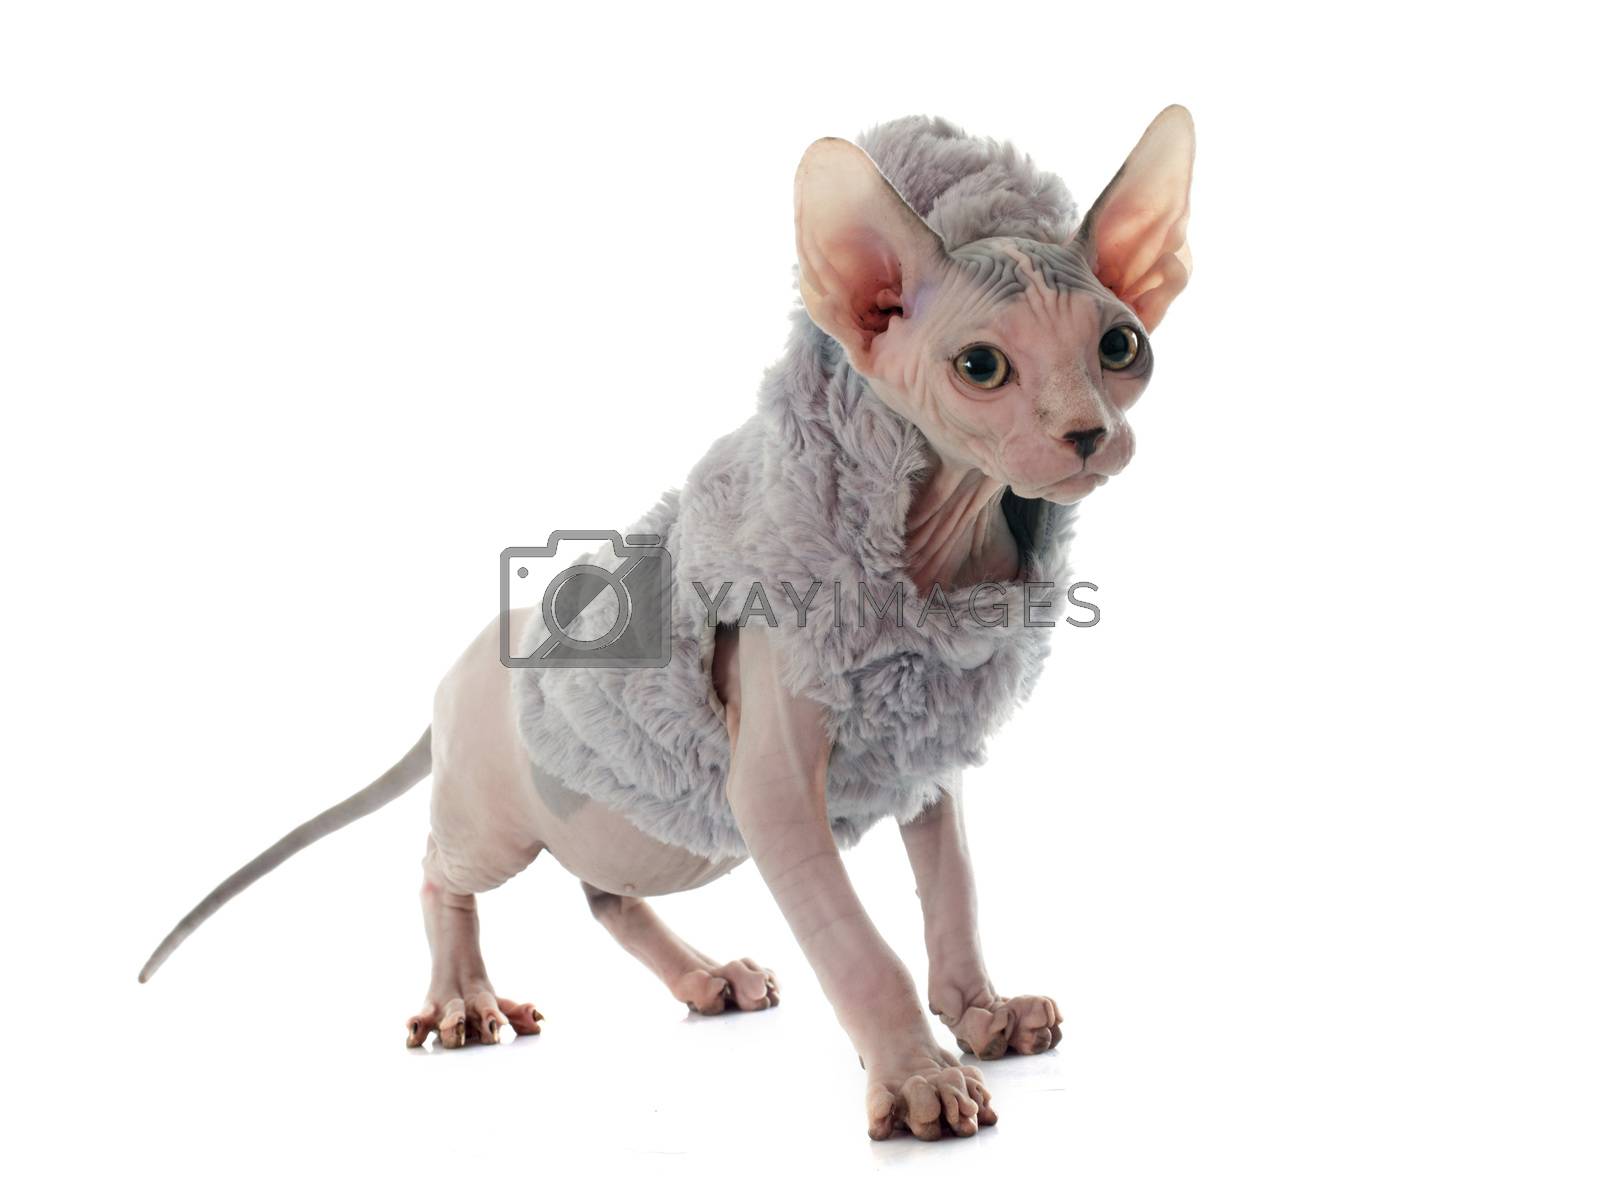 Royalty free image of dressed Sphynx Hairless Cat by cynoclub